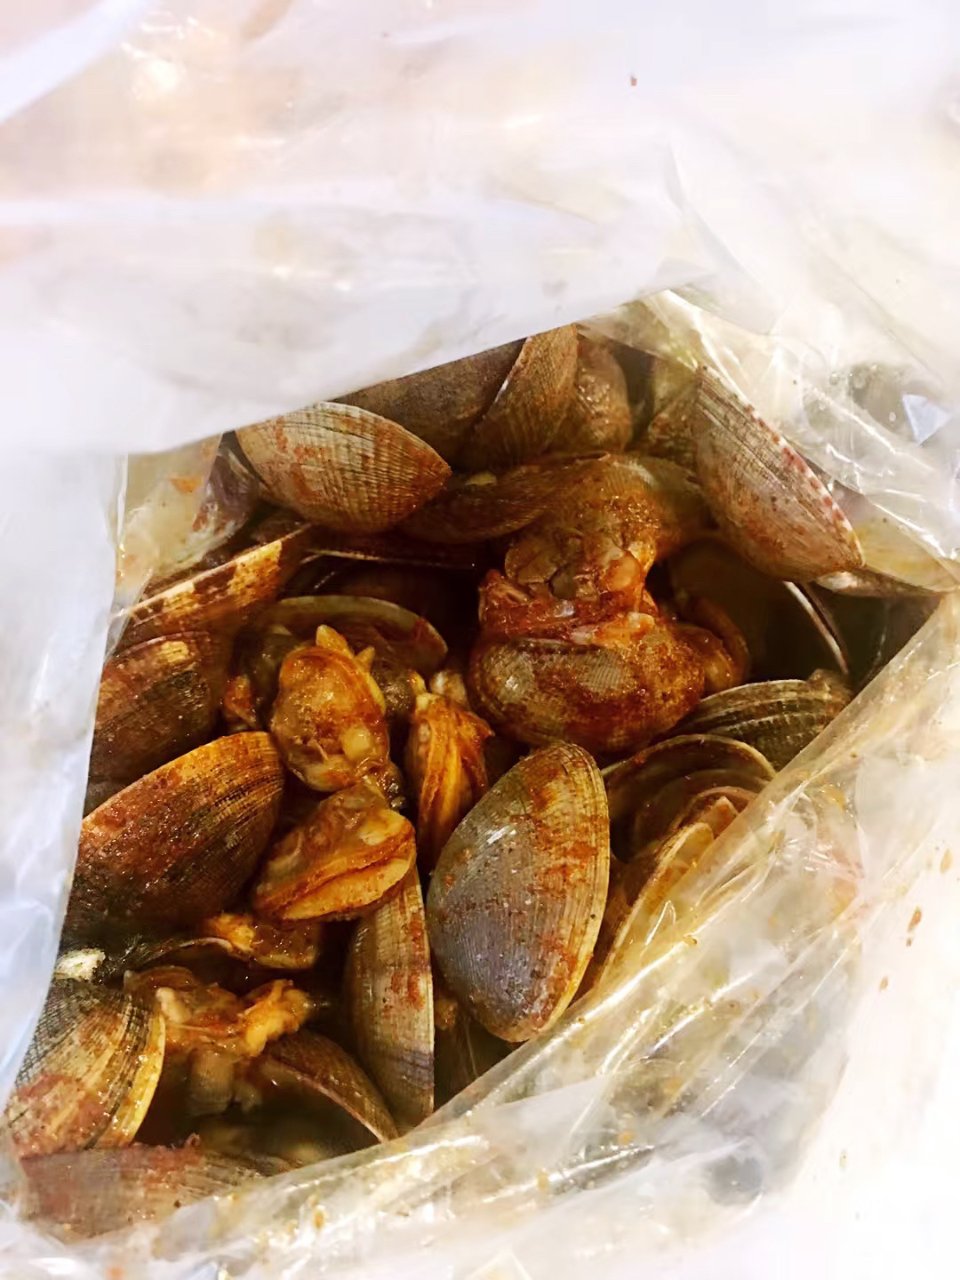 2.4｜The boiling crab...